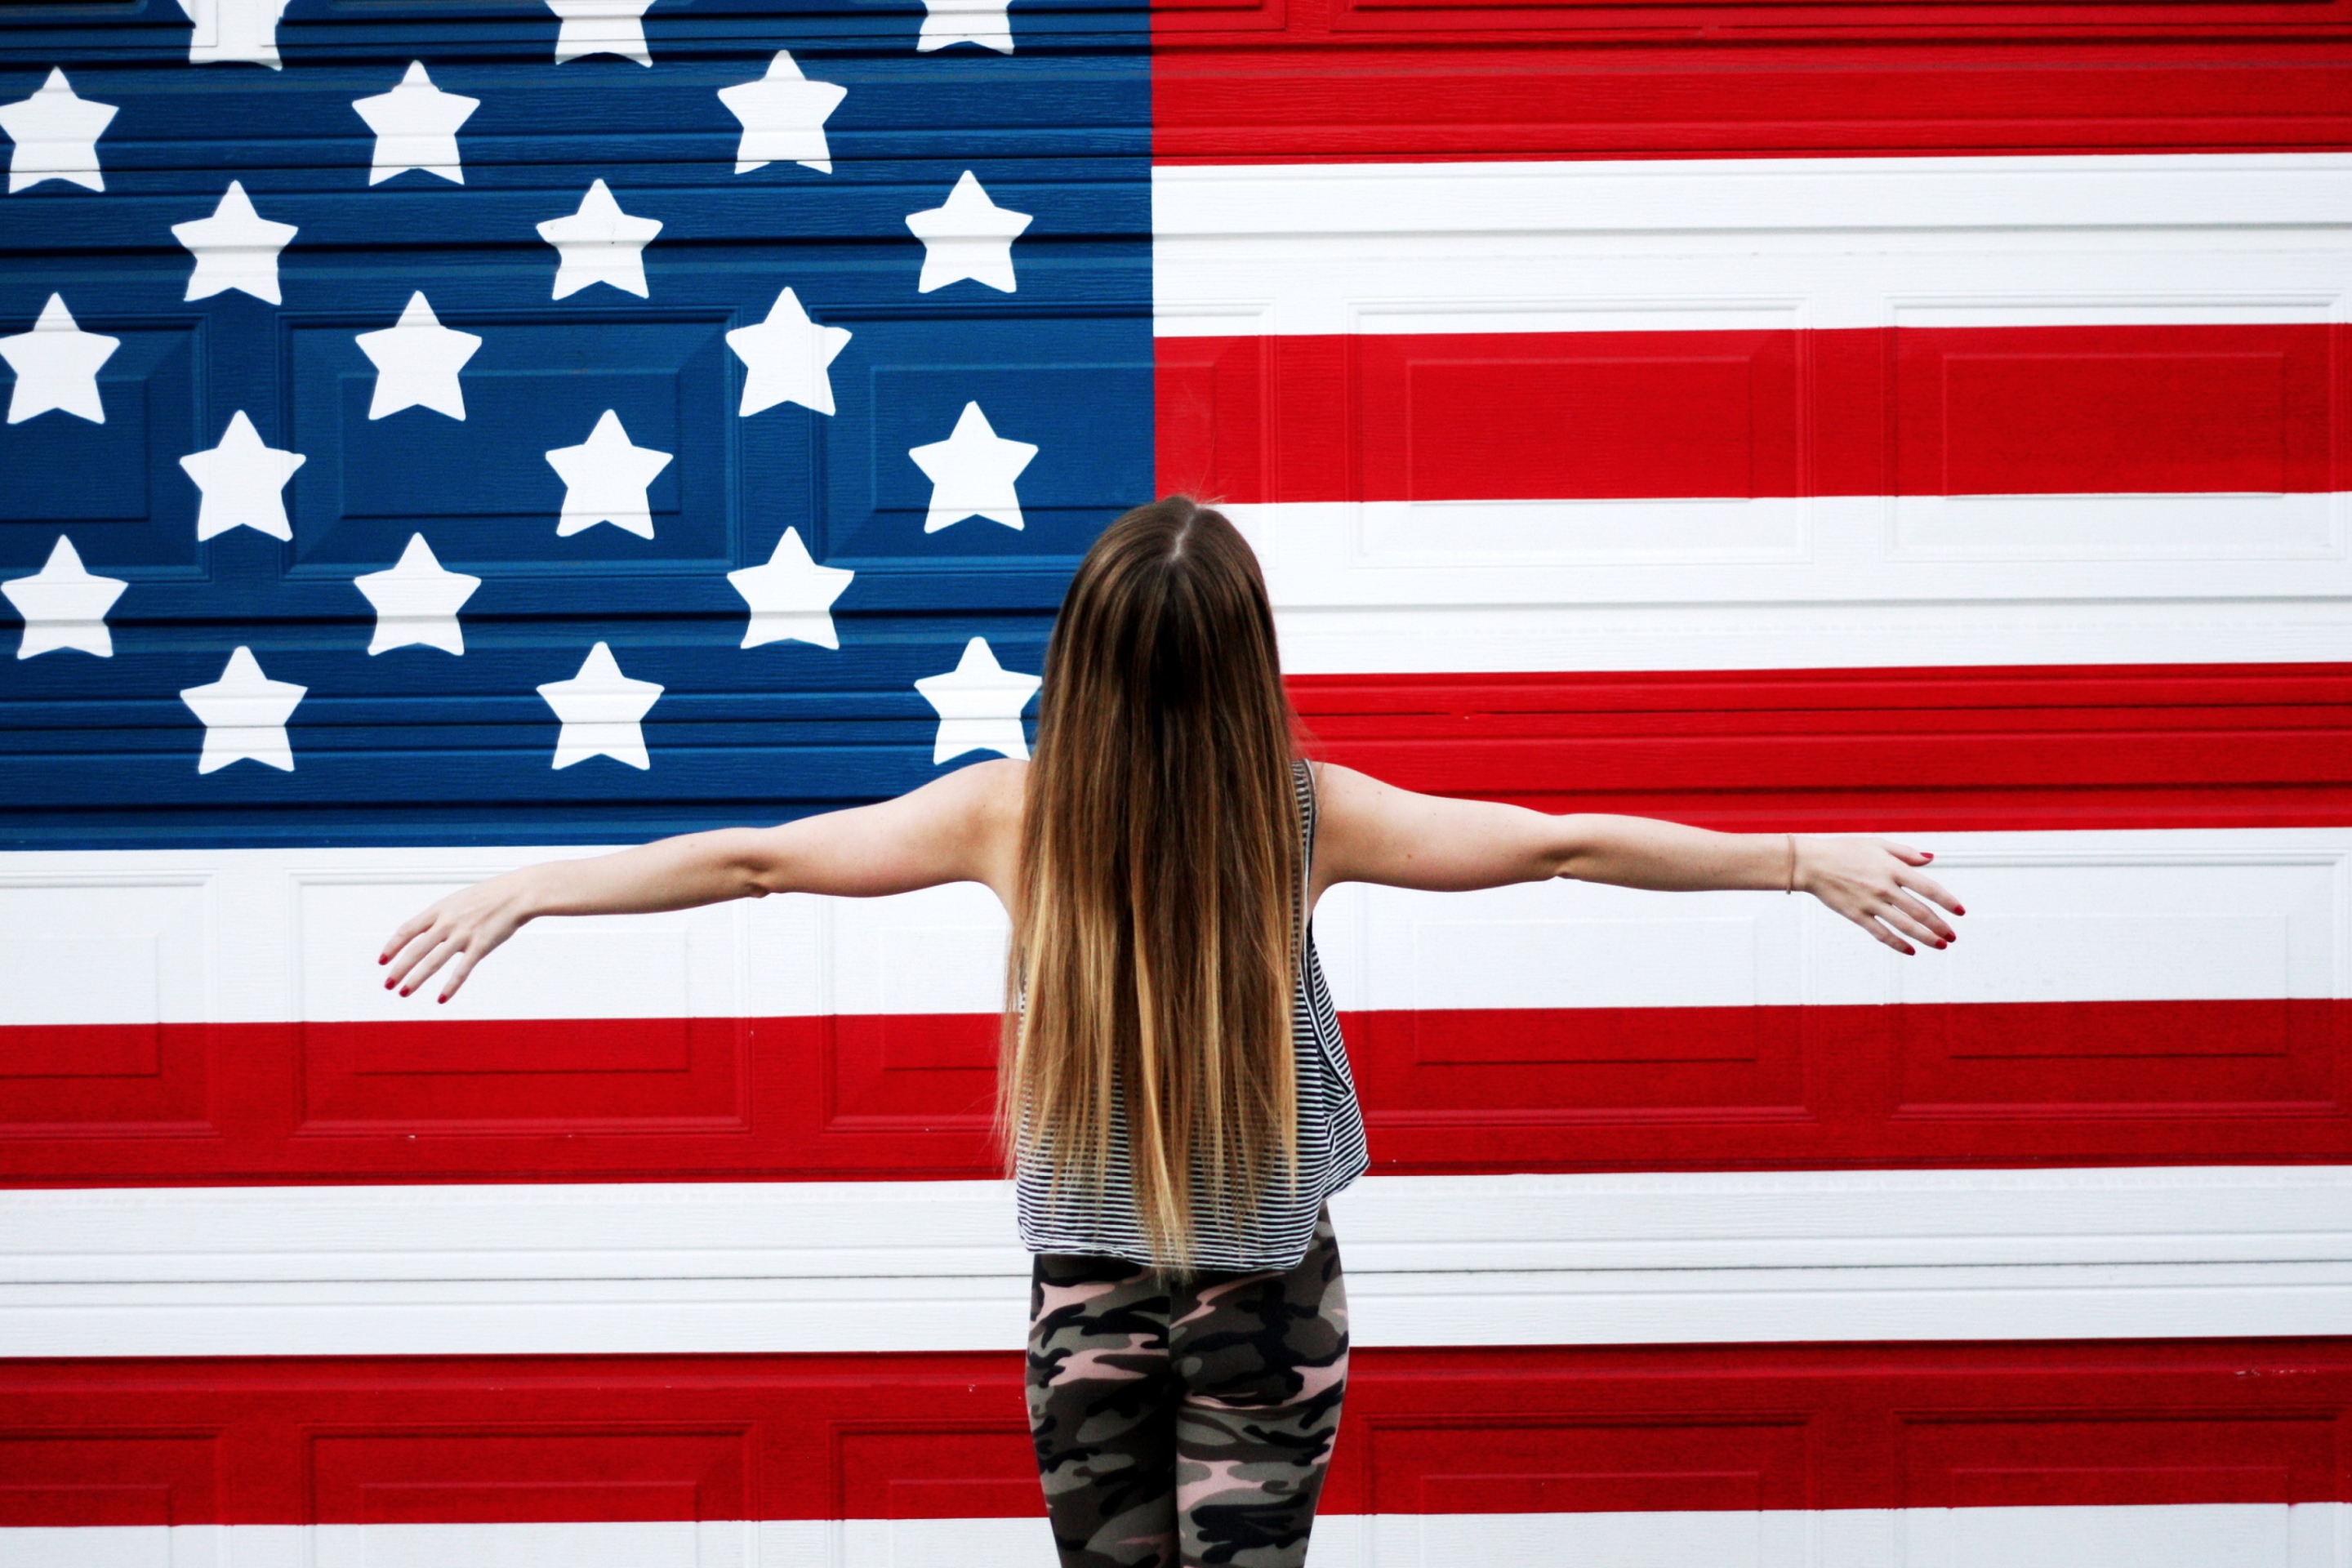 Das American Girl In Front Of USA Flag Wallpaper 2880x1920